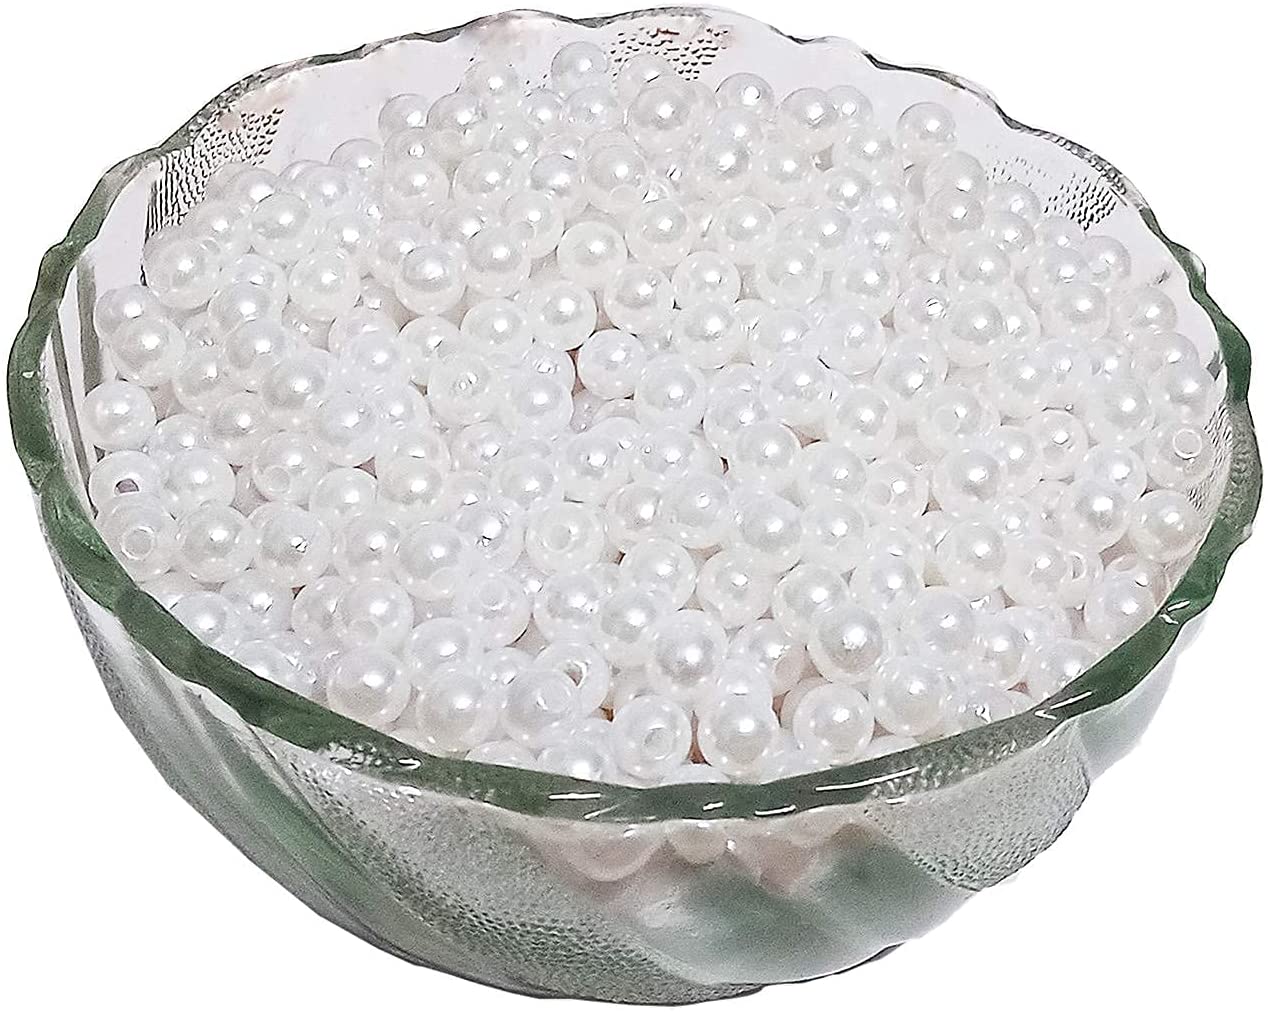 Lamansh Raw materials for Flower jewellery White / 1 Packet of 500 Grams 500 Grams Packet of Round Shape White Pearl/Moti Beads for Jewellery and Decoration ( 6 mm)